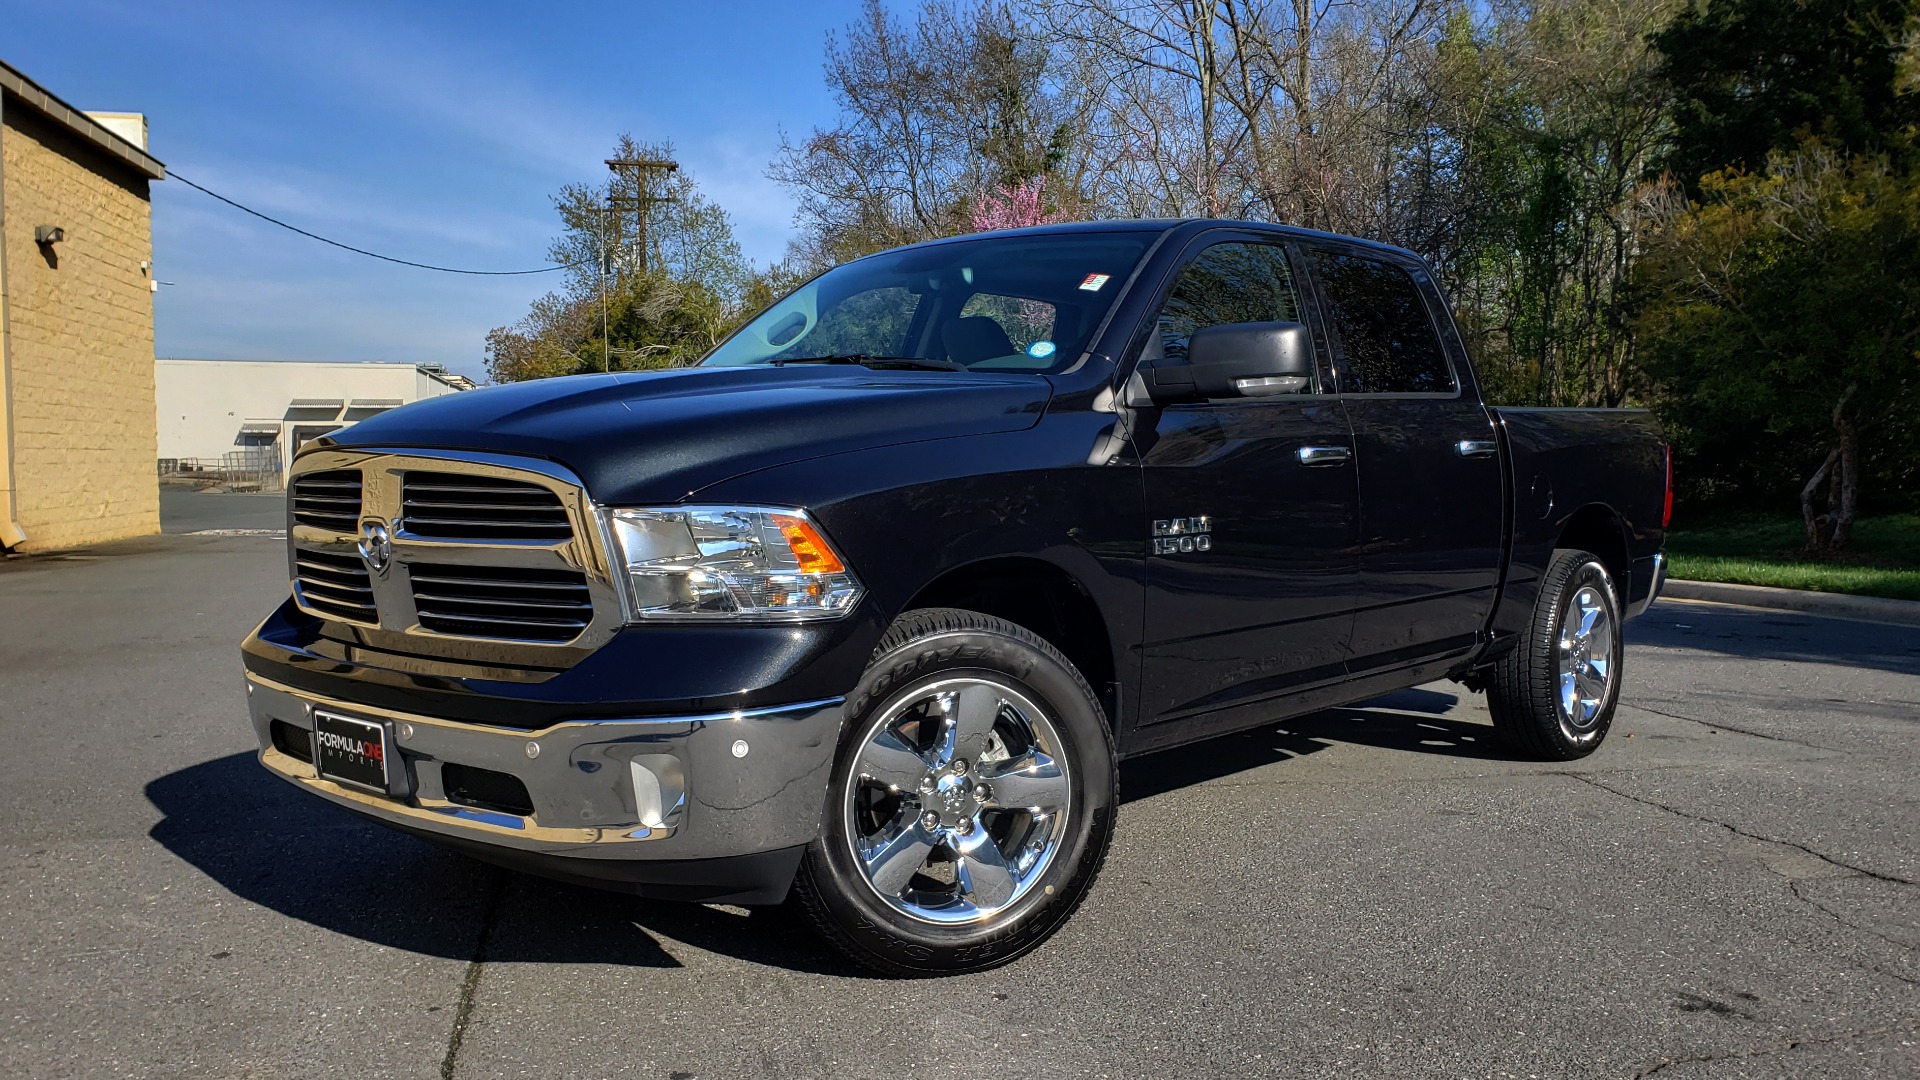 Used 2017 Ram 1500 BIG HORN CREW CAB 4X4 / 3.6L V6 / 8-SPD AUTO / WIFI HOTSPOT for sale Sold at Formula Imports in Charlotte NC 28227 1